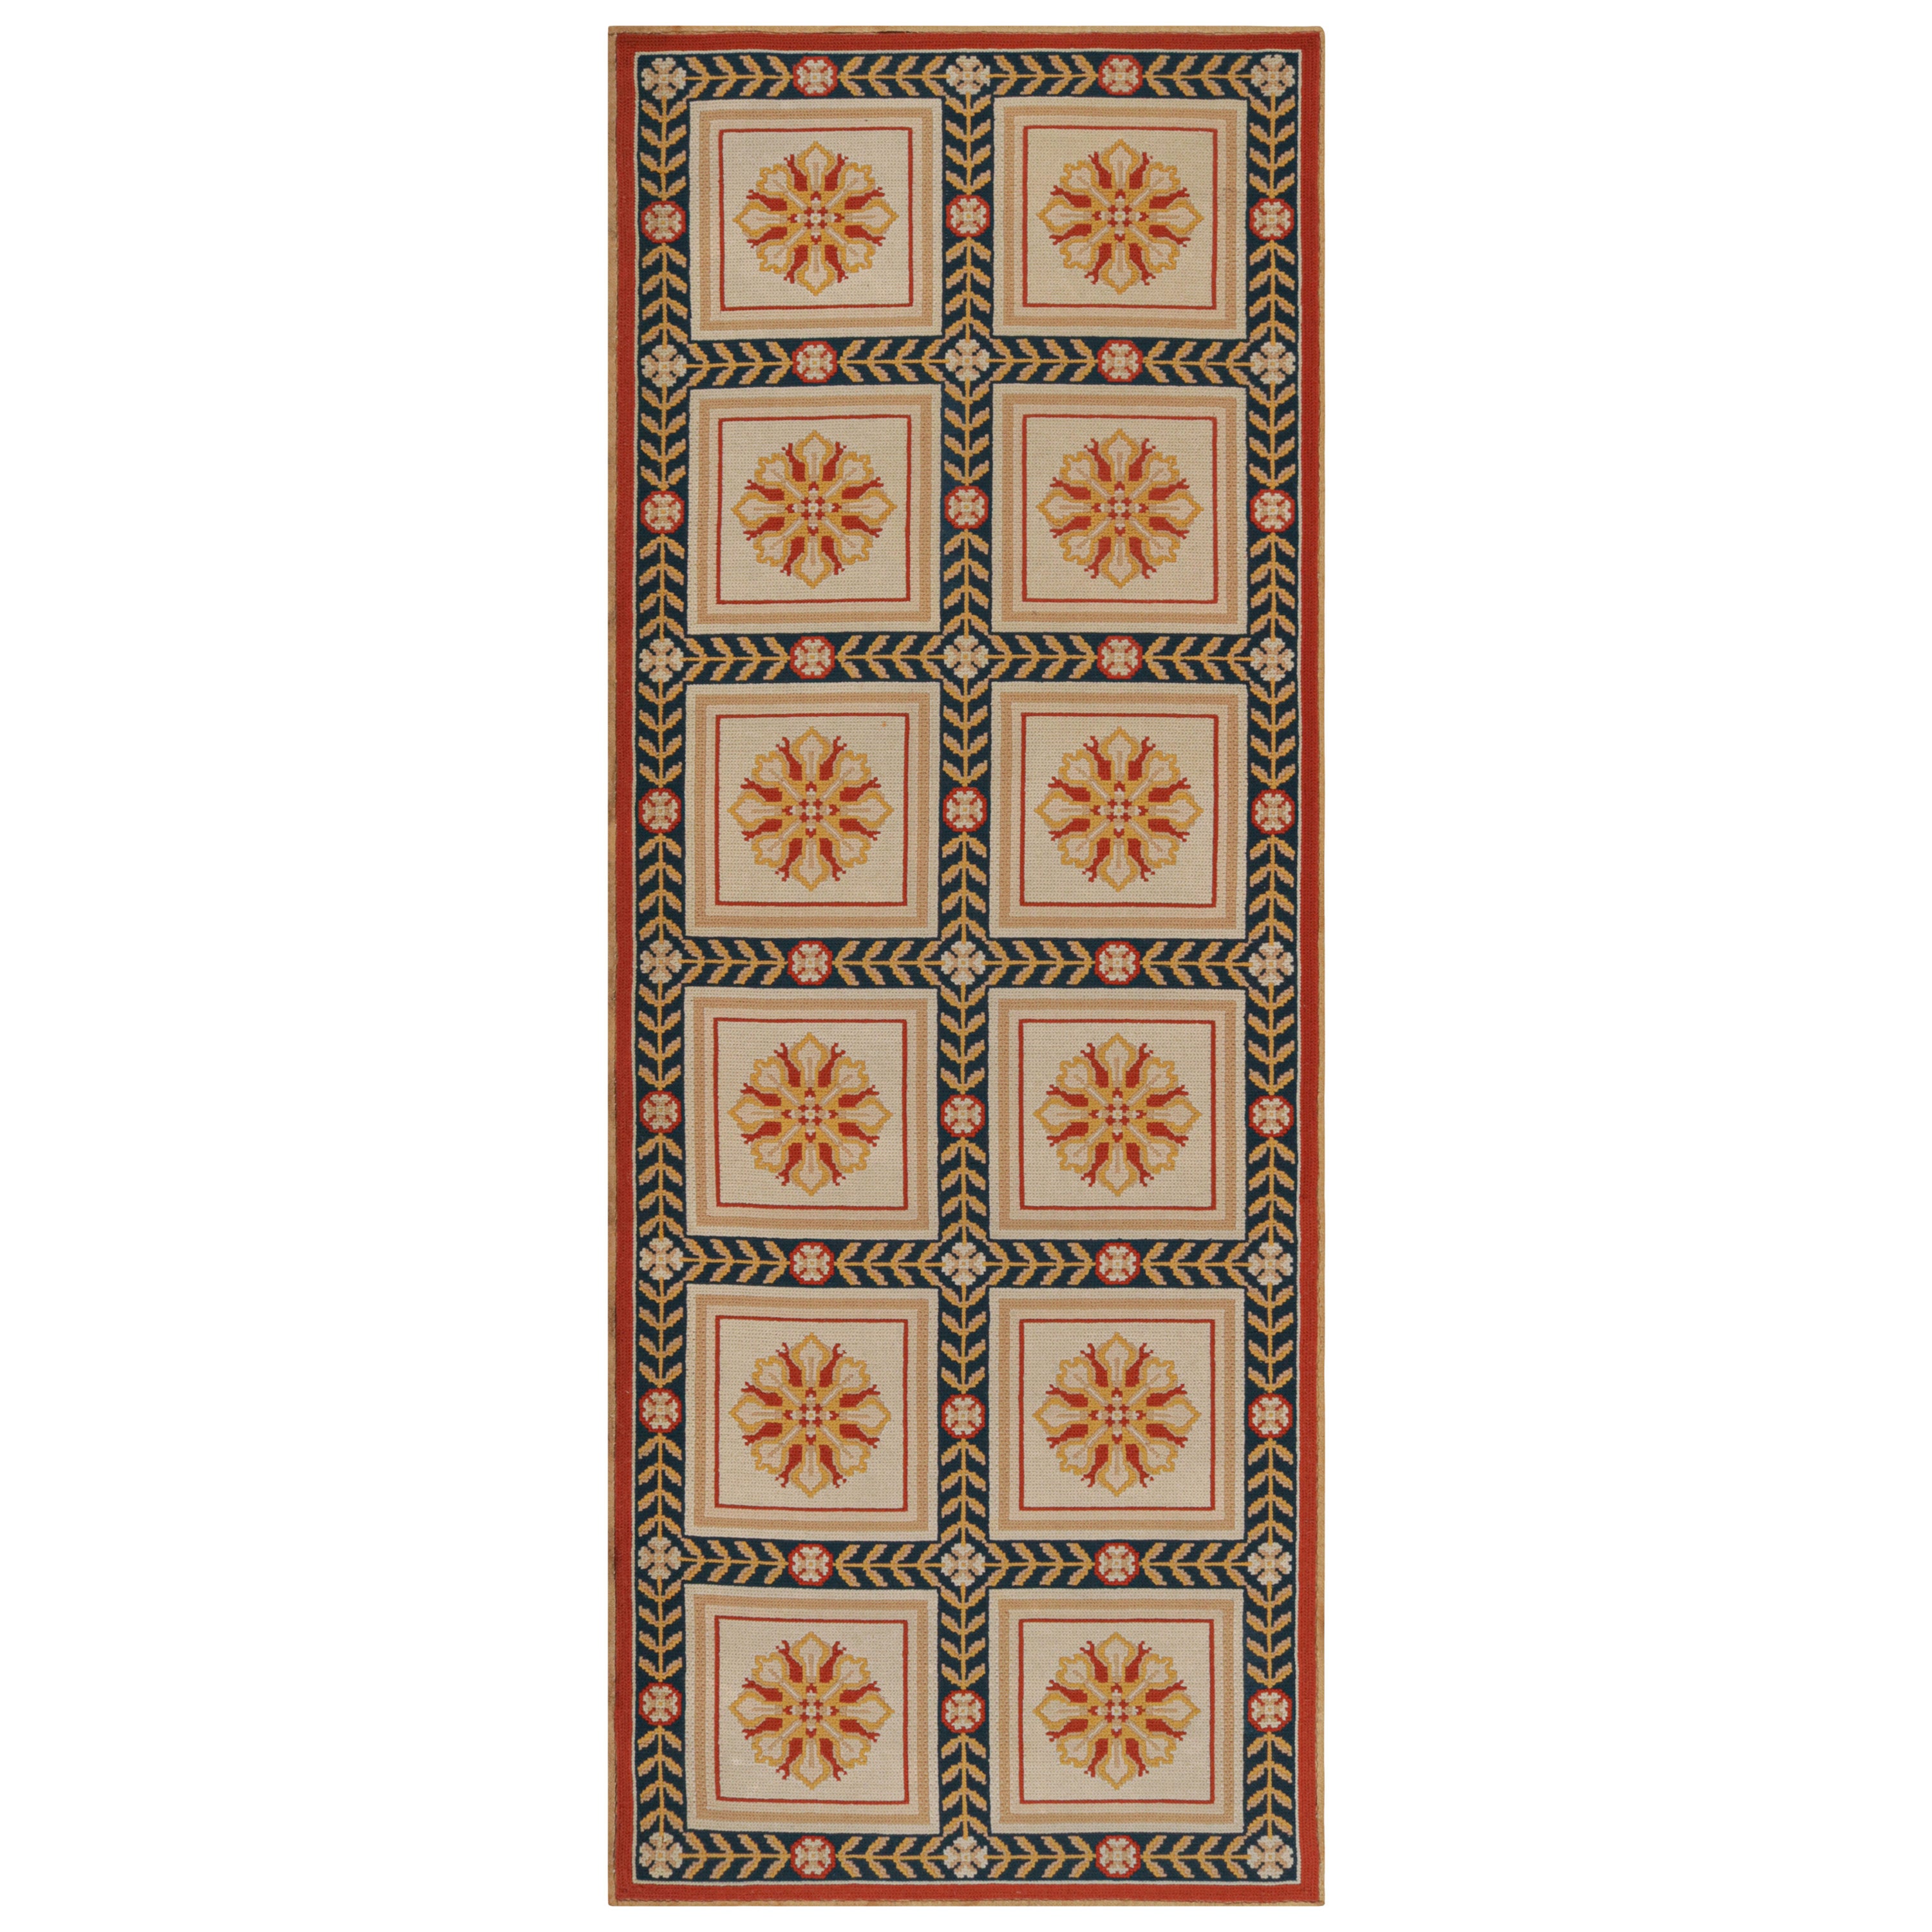 Antique Arraiolos Needlepoint Runner With Floral Medallions, From Rug & Kilim